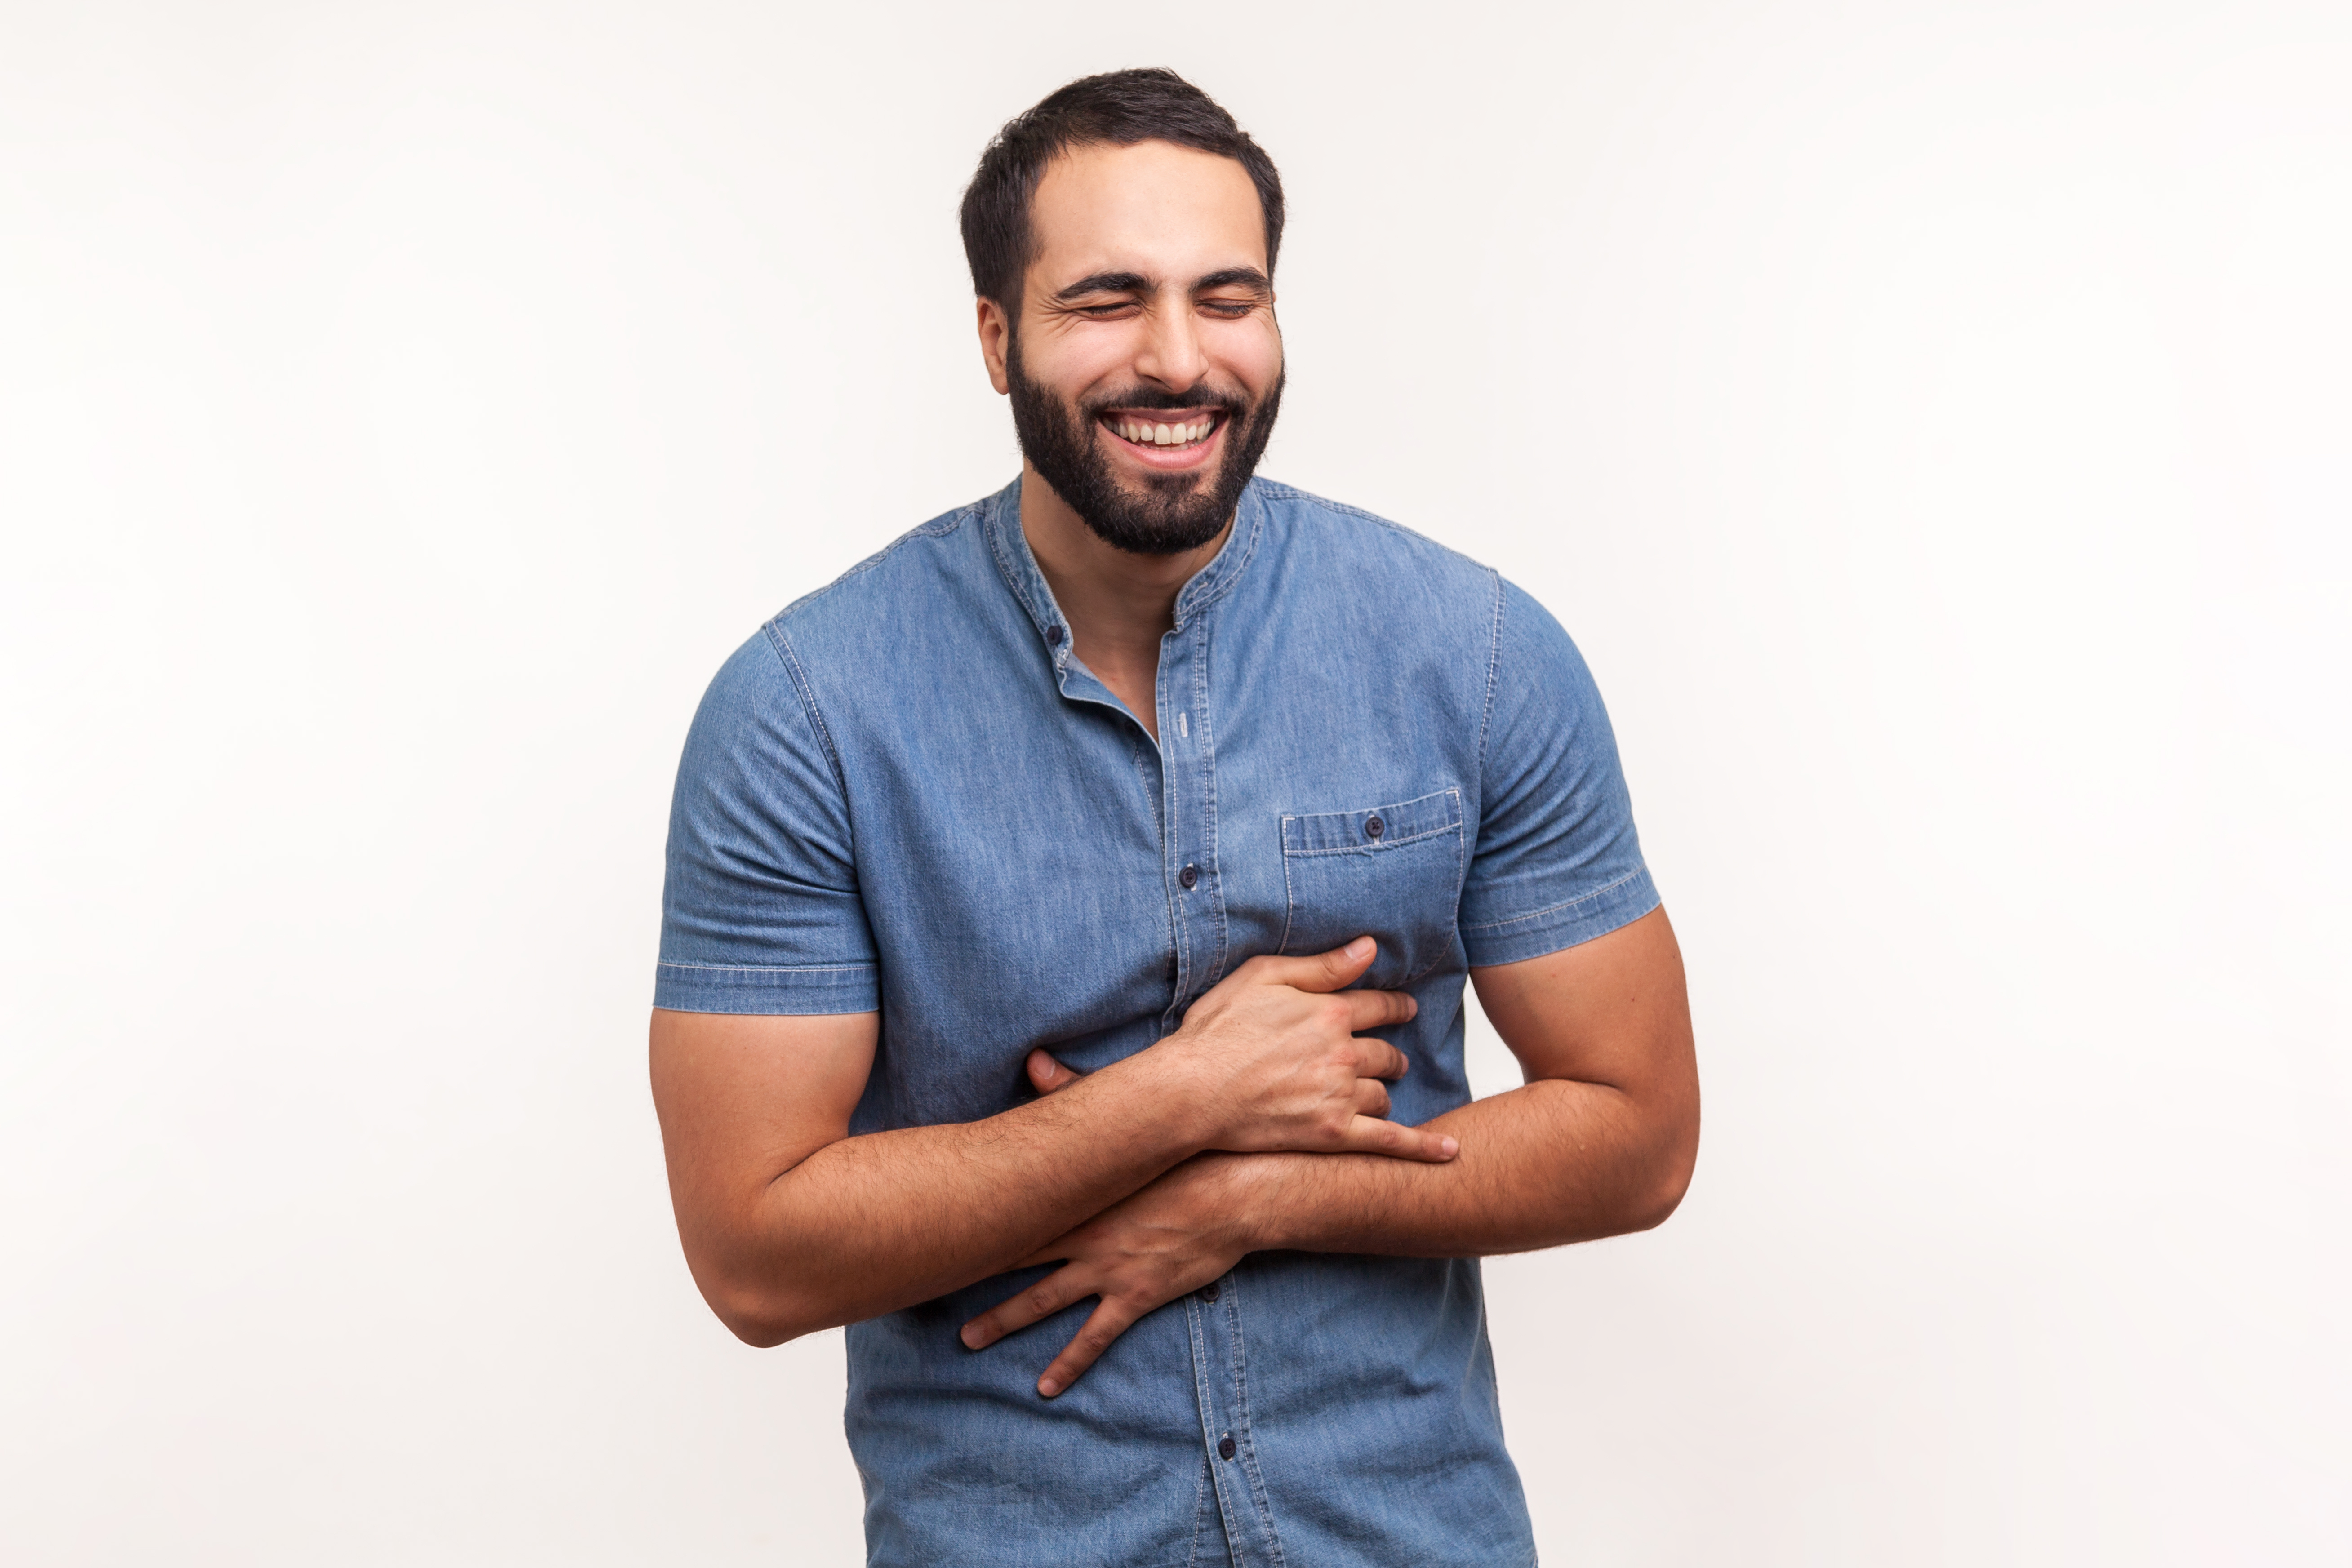 A man holding his abdomen as he laughs | Shutterstock